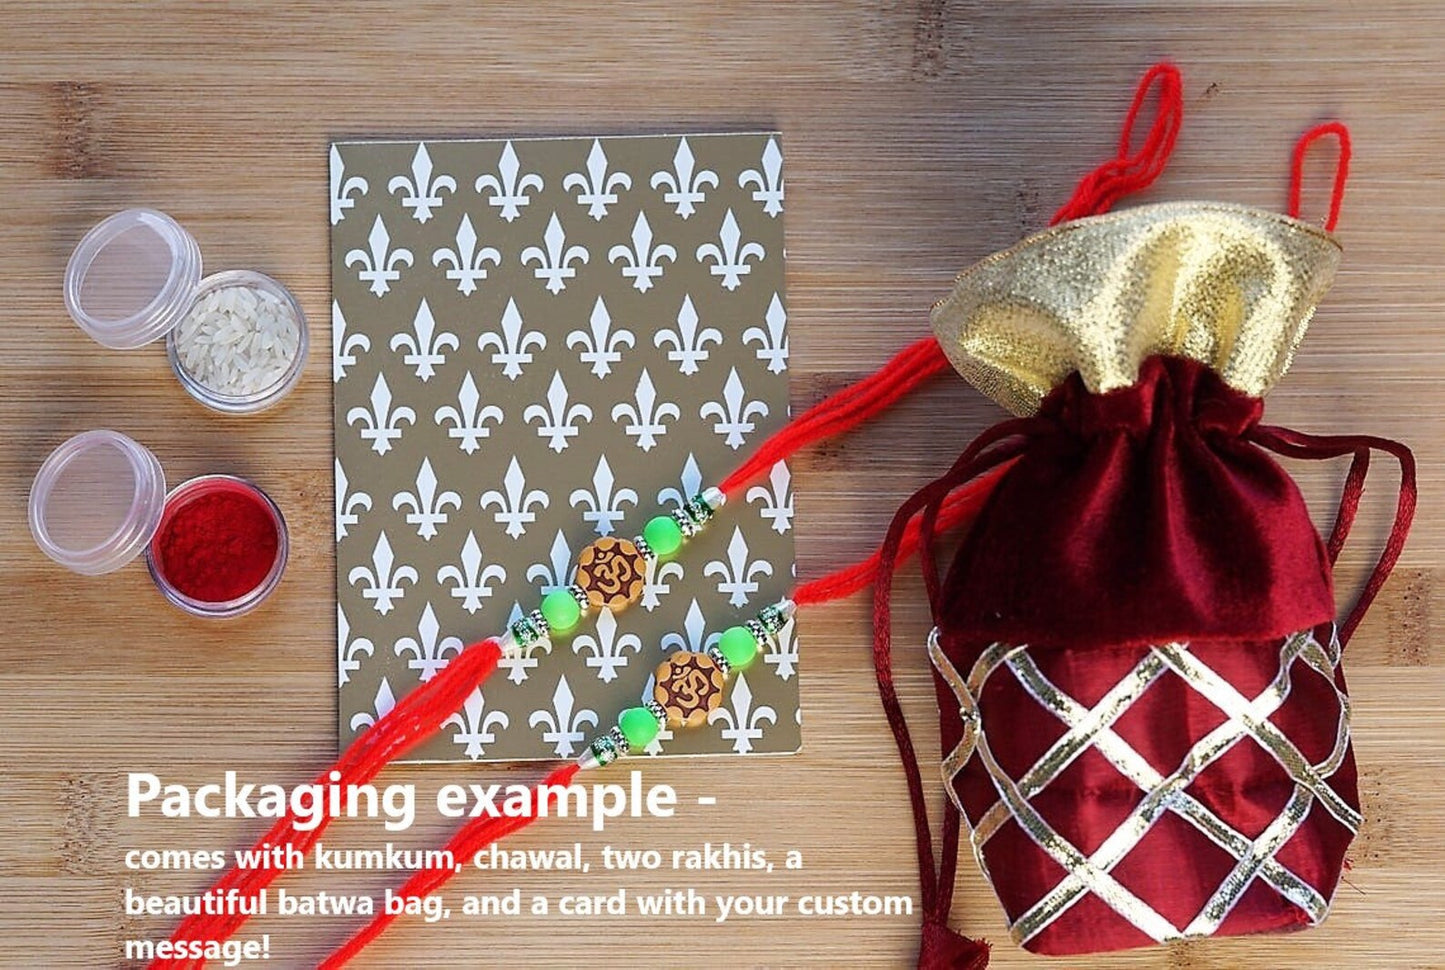 Brother rakhi with Om bead, Made with golden beads and thread. Simple rakhi for brother. Here's our packaging example 